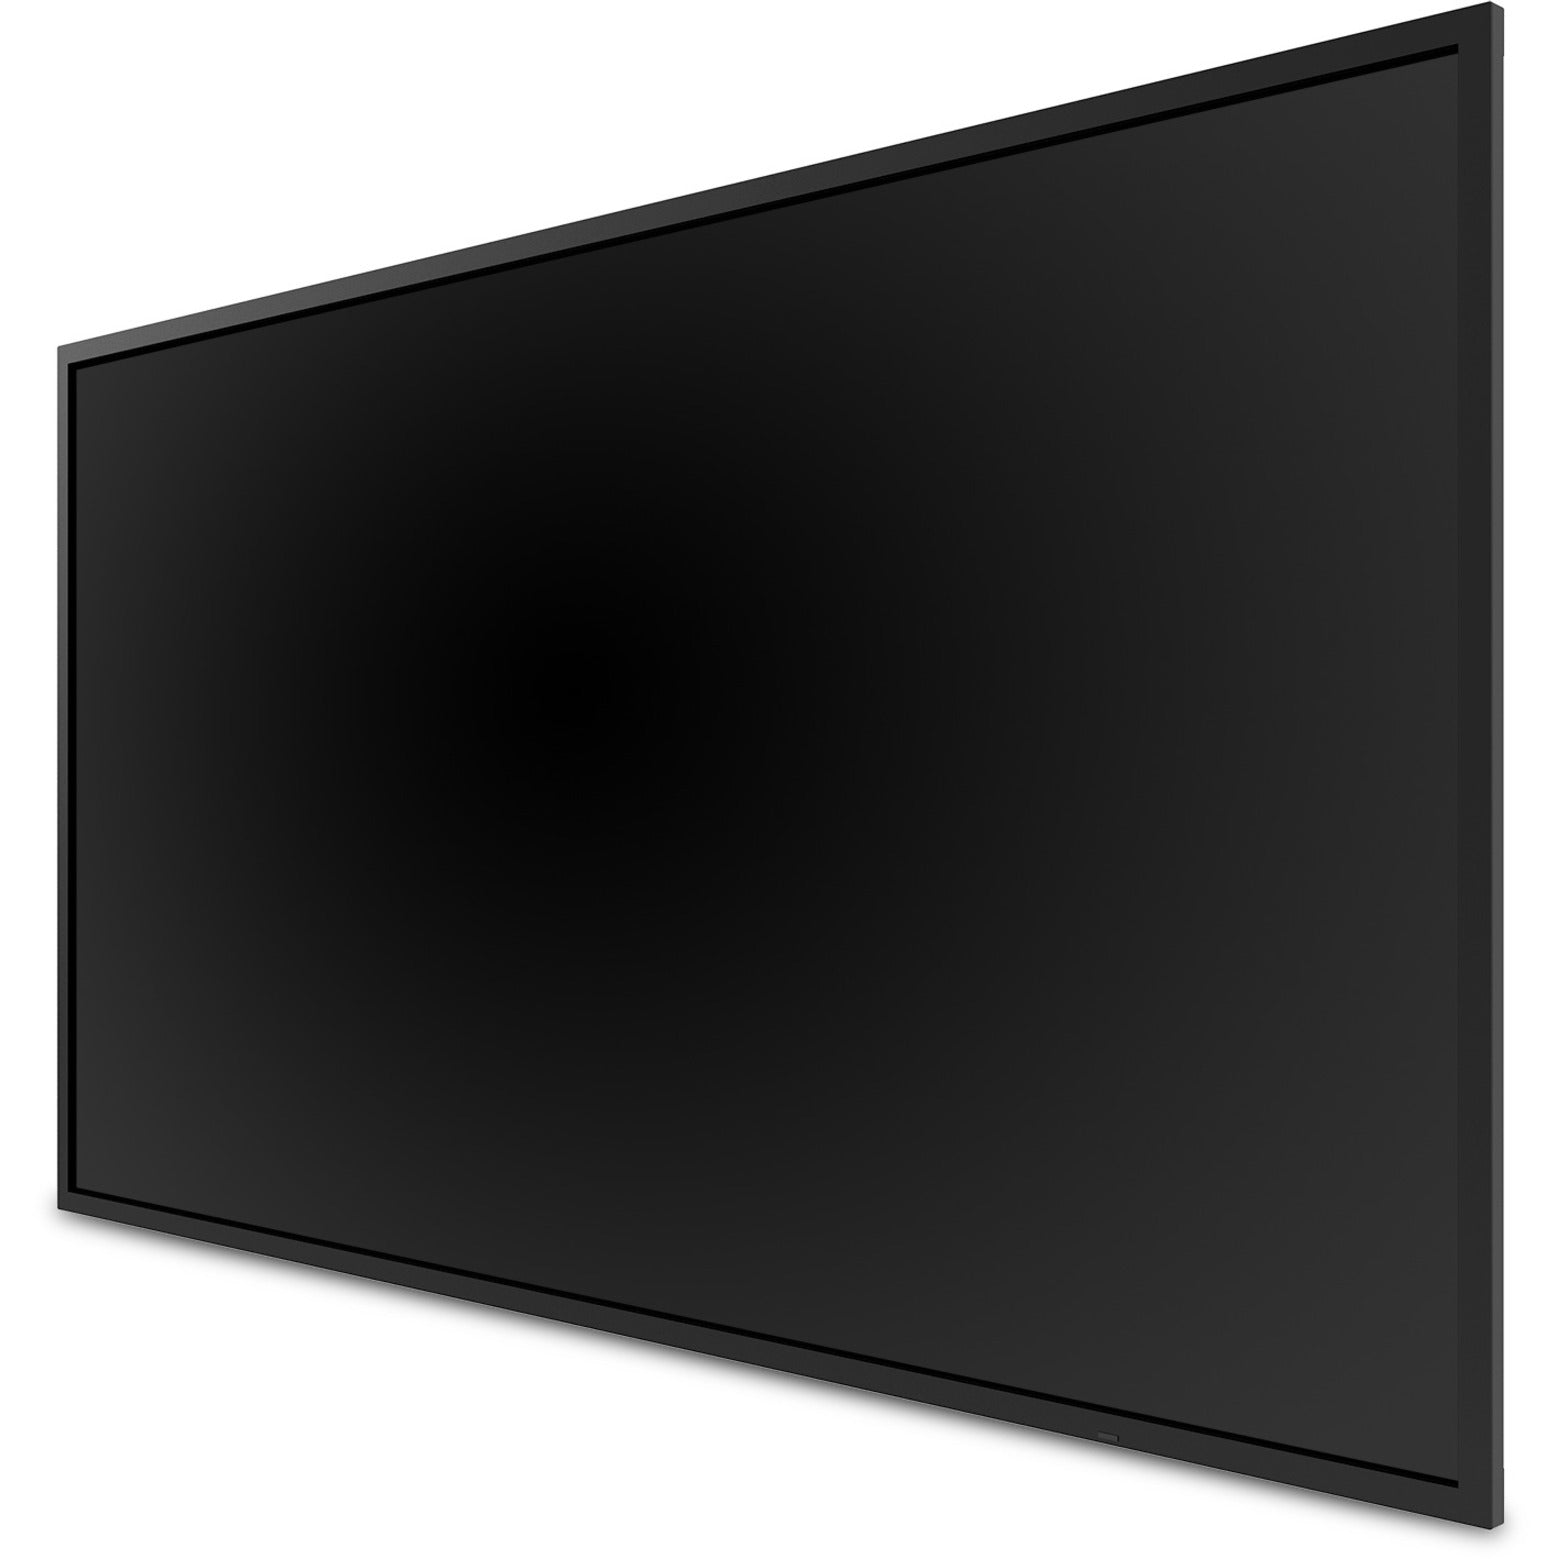 ViewSonic CDE5520 Digital Signage Display - 55" 4K LCD, Direct LED, 400 Nit, Dual-core Processor [Discontinued]